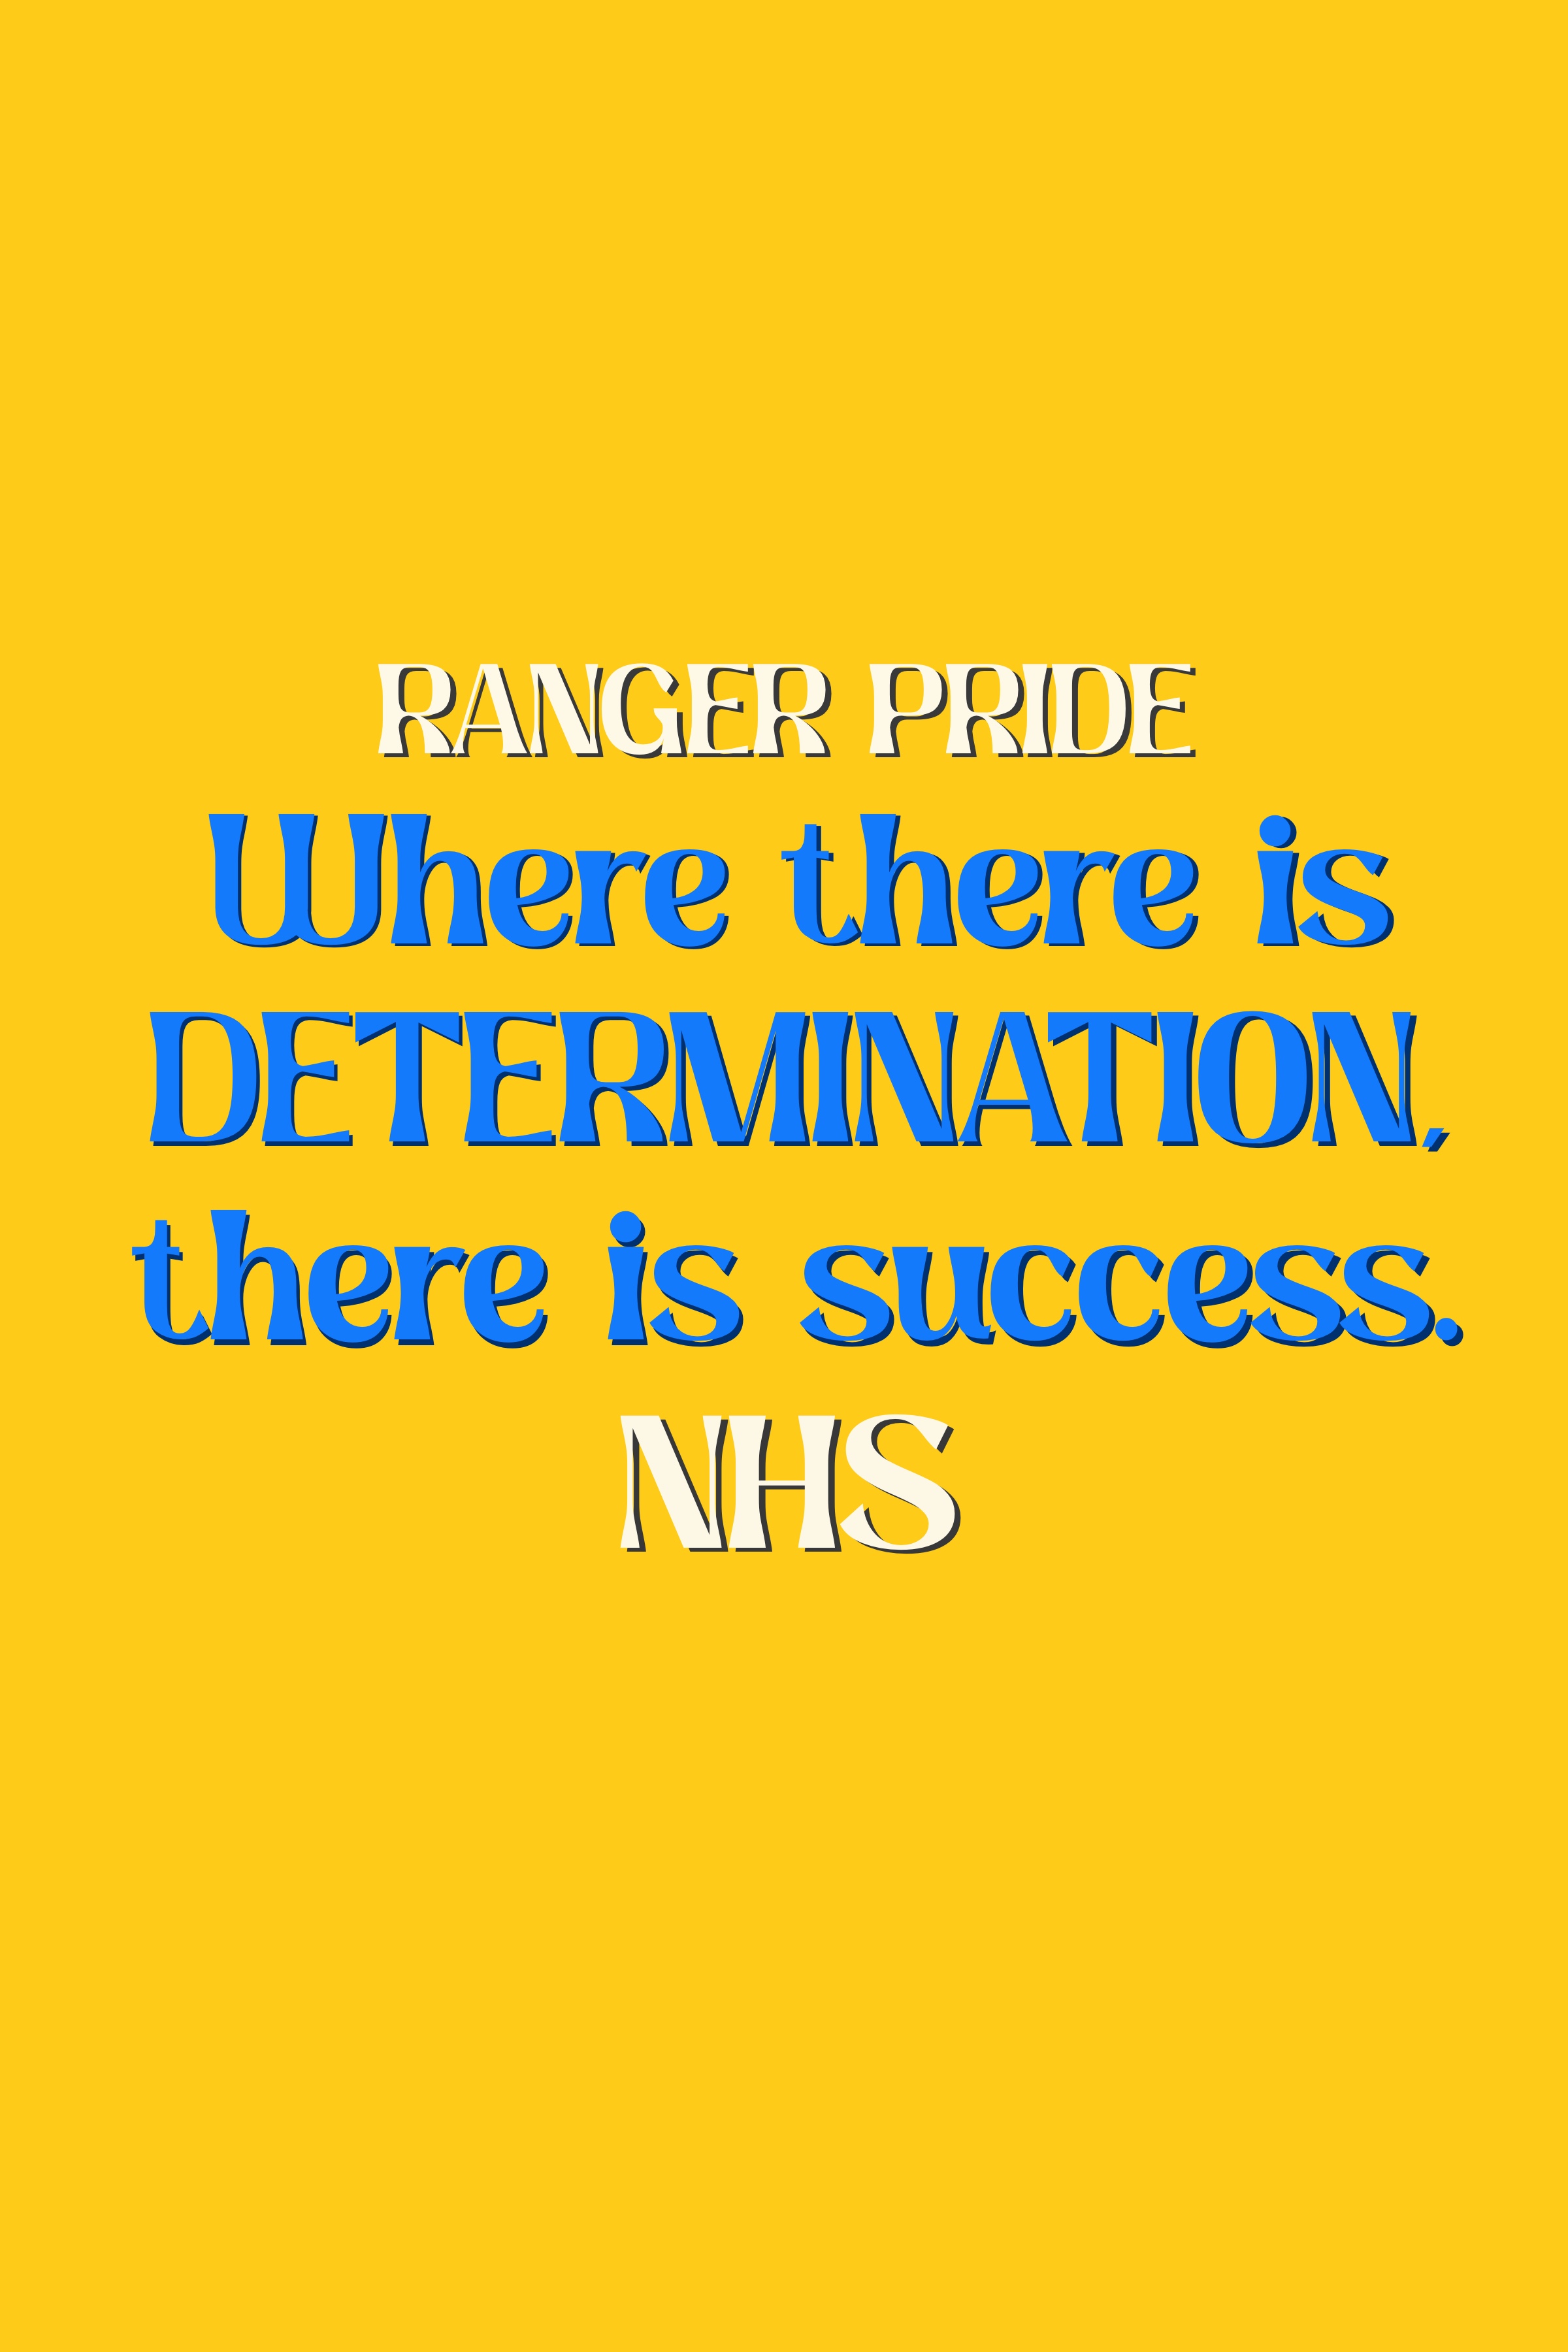 PNCER DRID)E
Where there is
DETERMINATION.
there is success.
INES